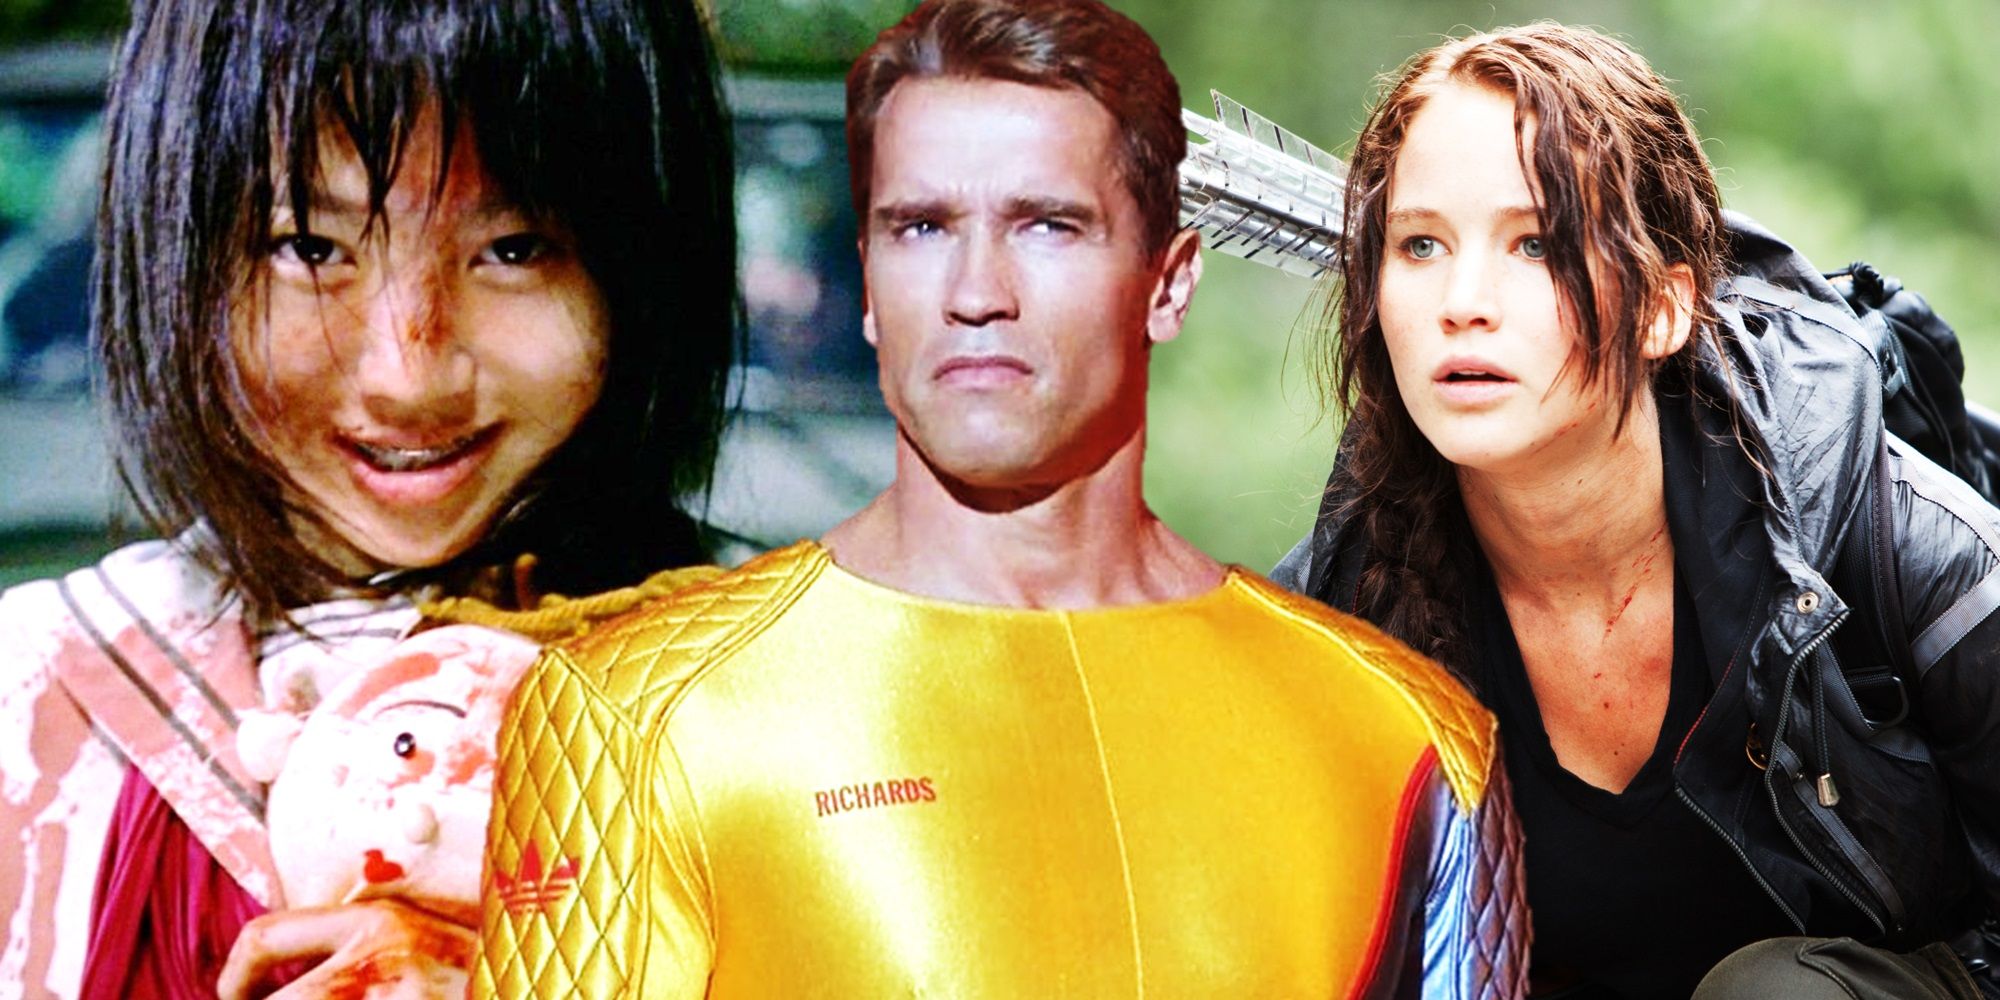 Collage of a girl covered in blood in Battle Royale, Arnold Schwarzenegger in The Running Man, and Jennifer Lawrence in The Hunger Games